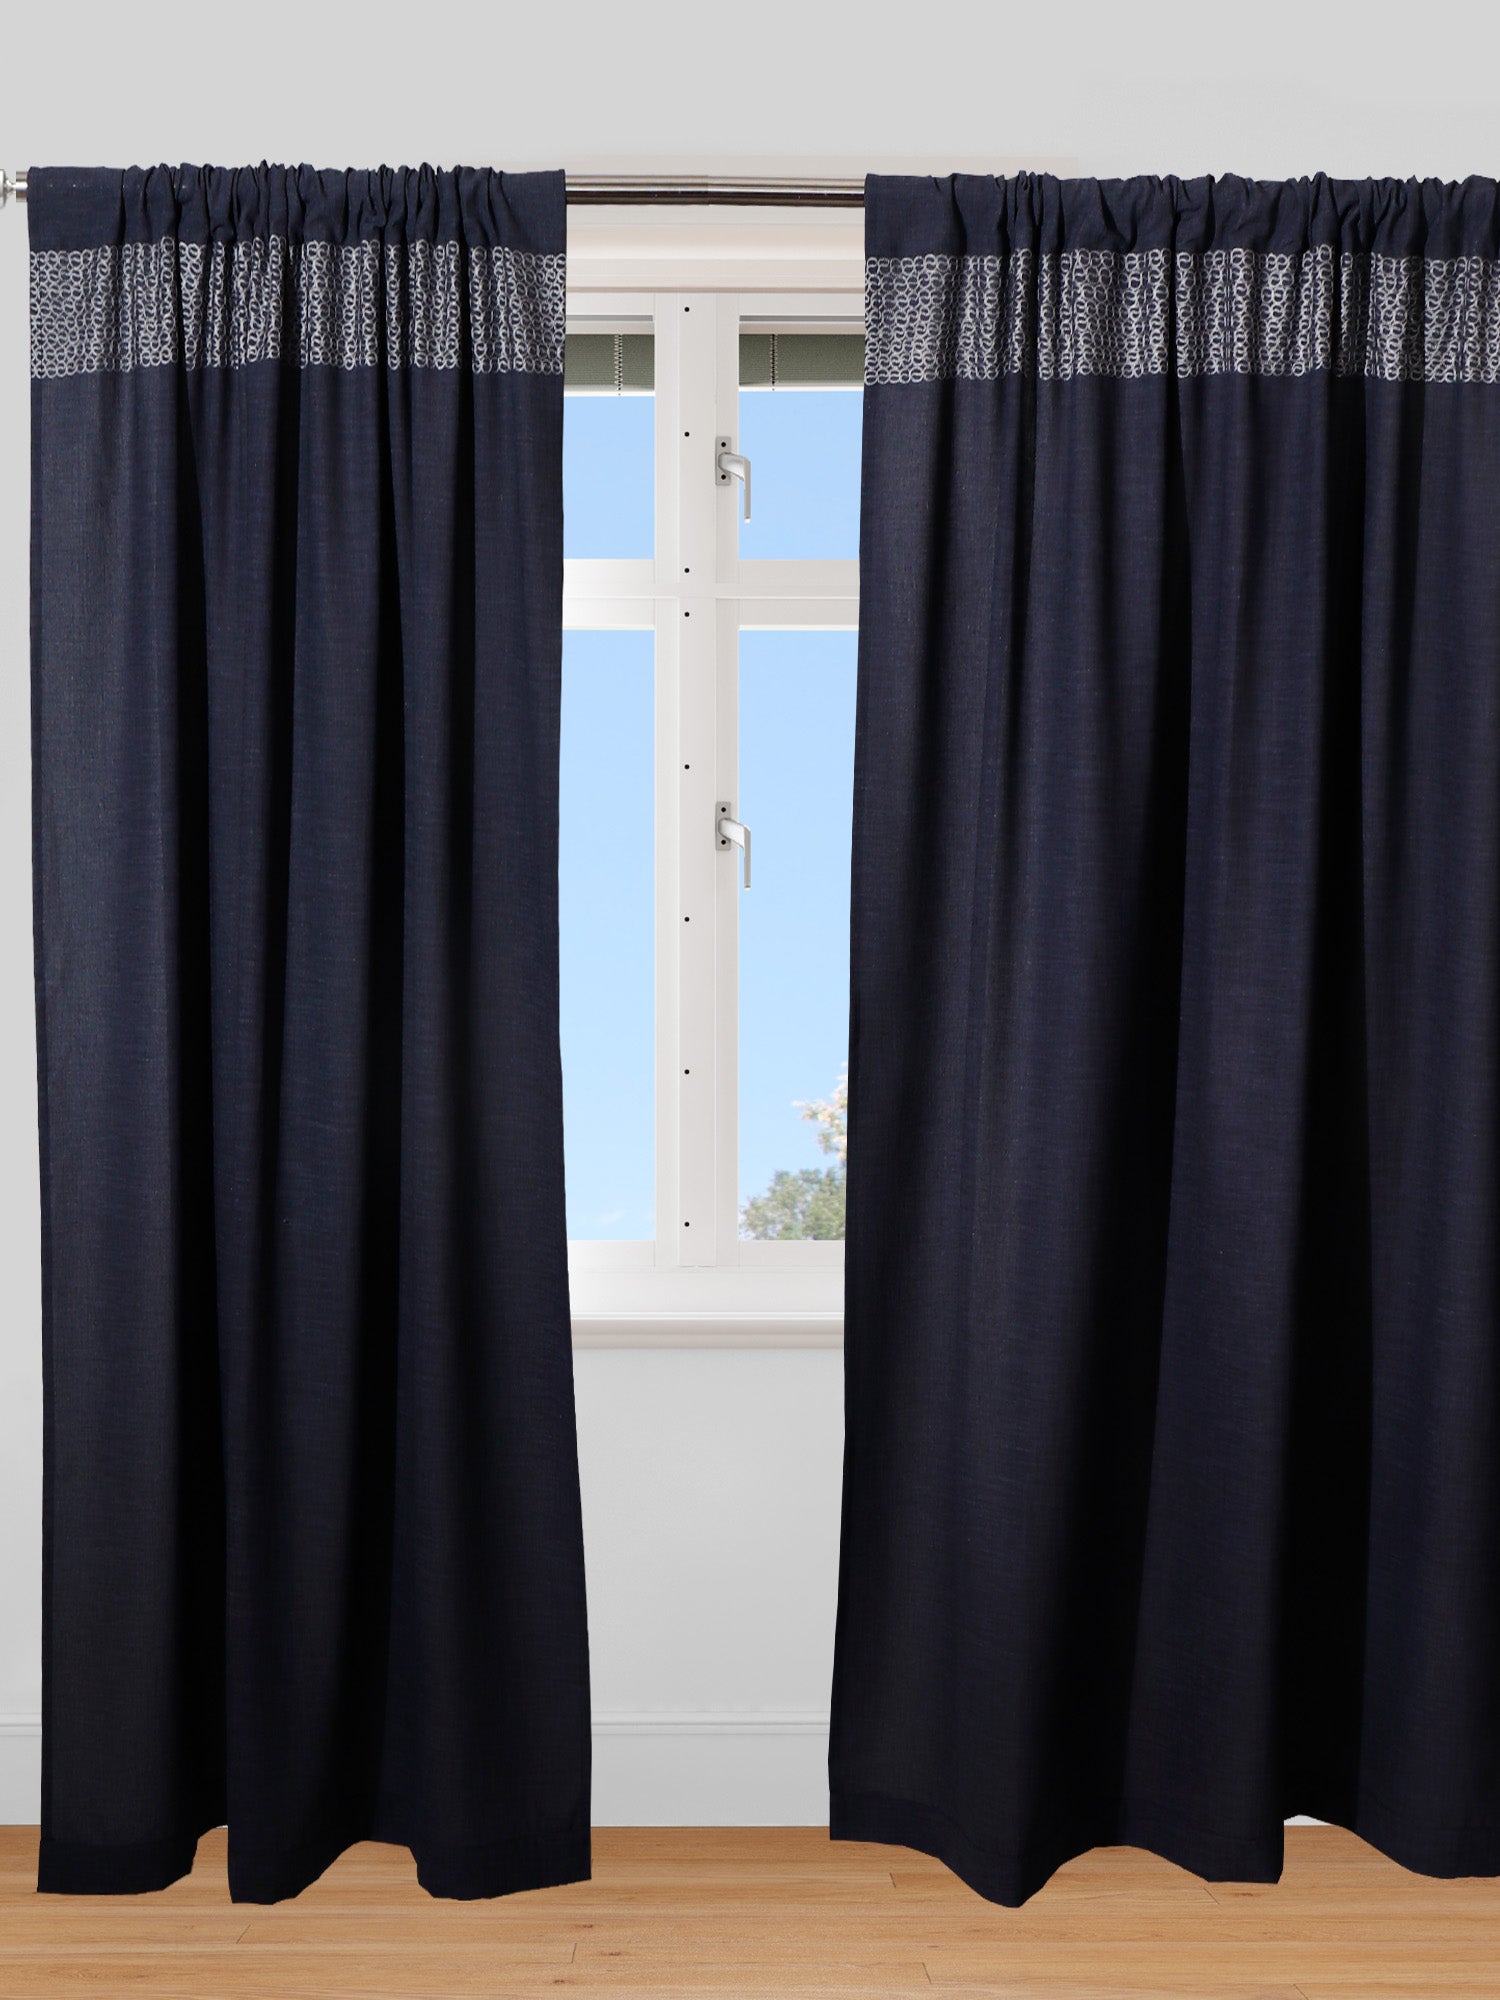 set of 2 door curtains with embroidery on top with rod pocket in dark blue color - 7 feet, 50x84 inch